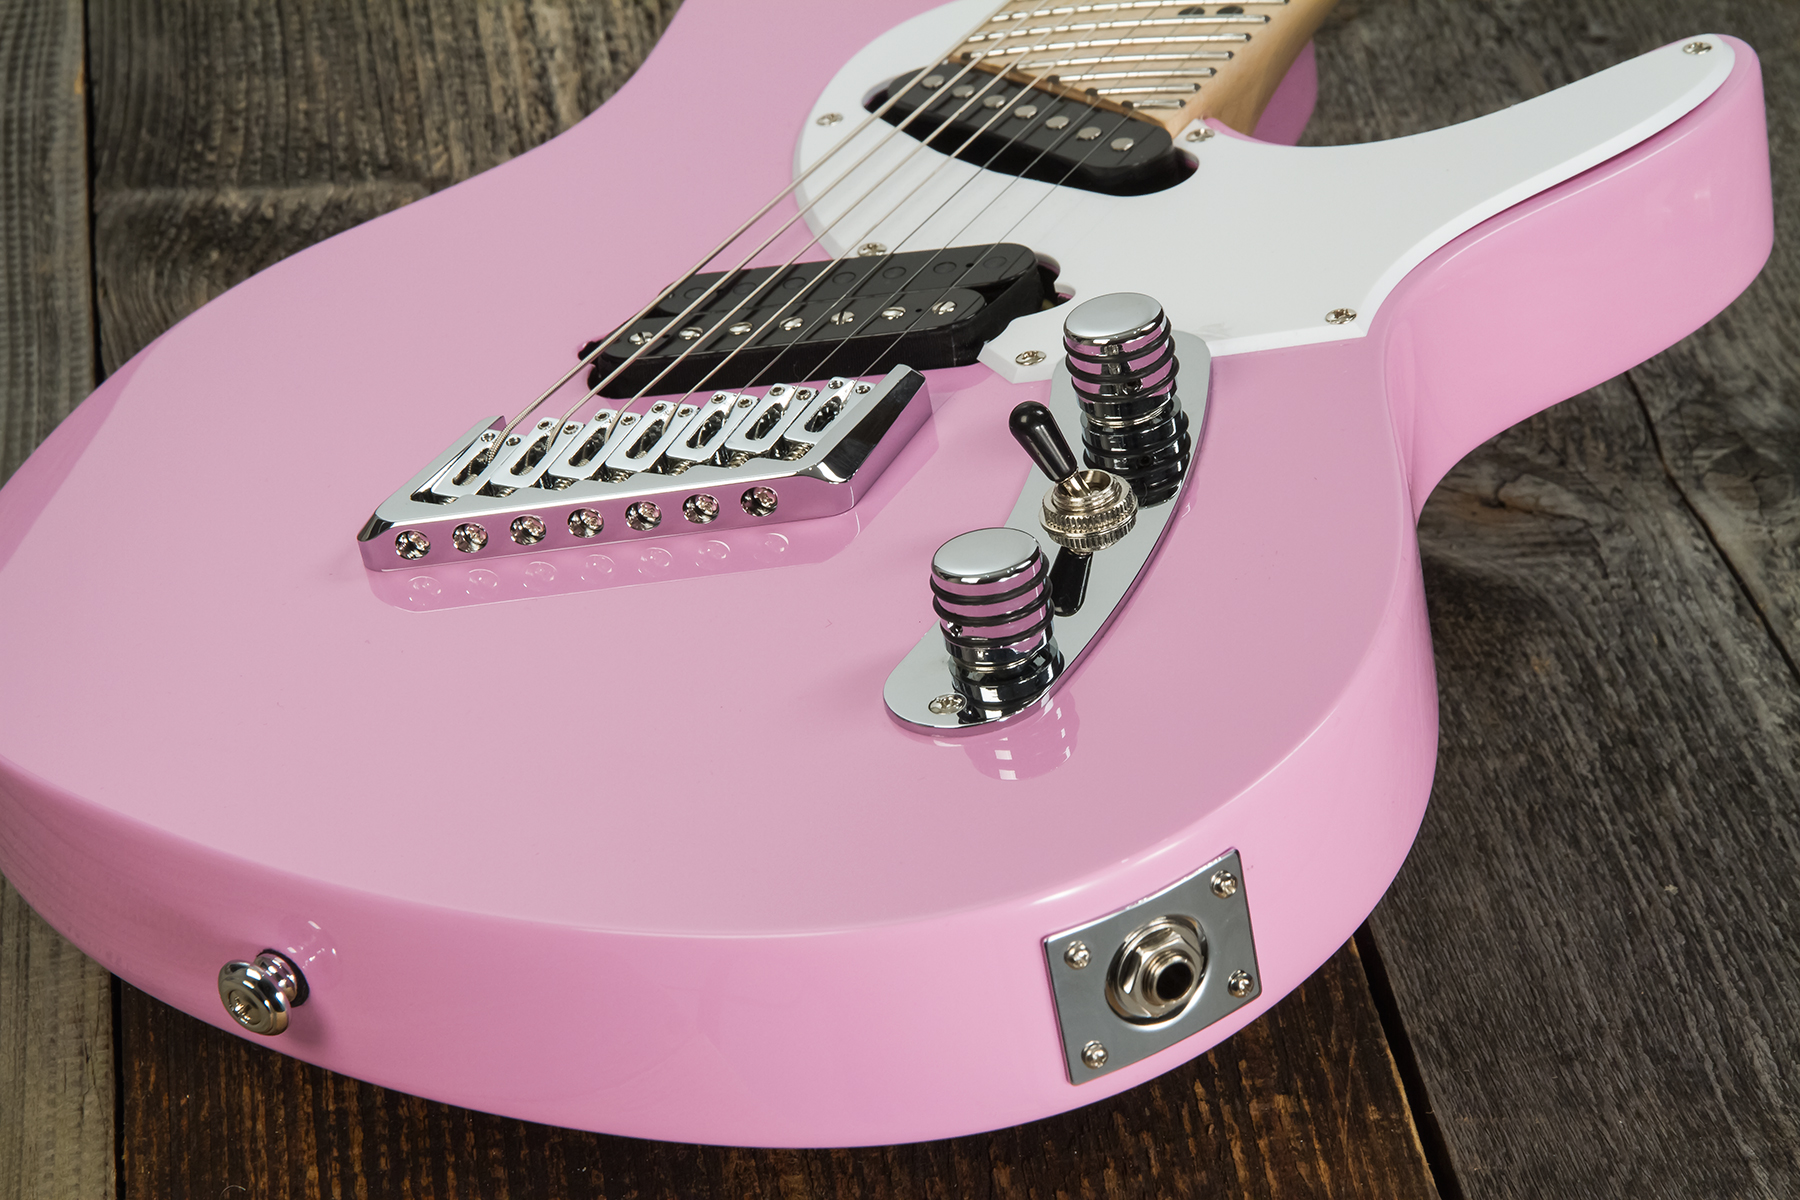 Ormsby Tx Gtr Vintage 7c Multiscale Hs Ht Mn - Shell Pink - Multi-Scale Guitar - Variation 4